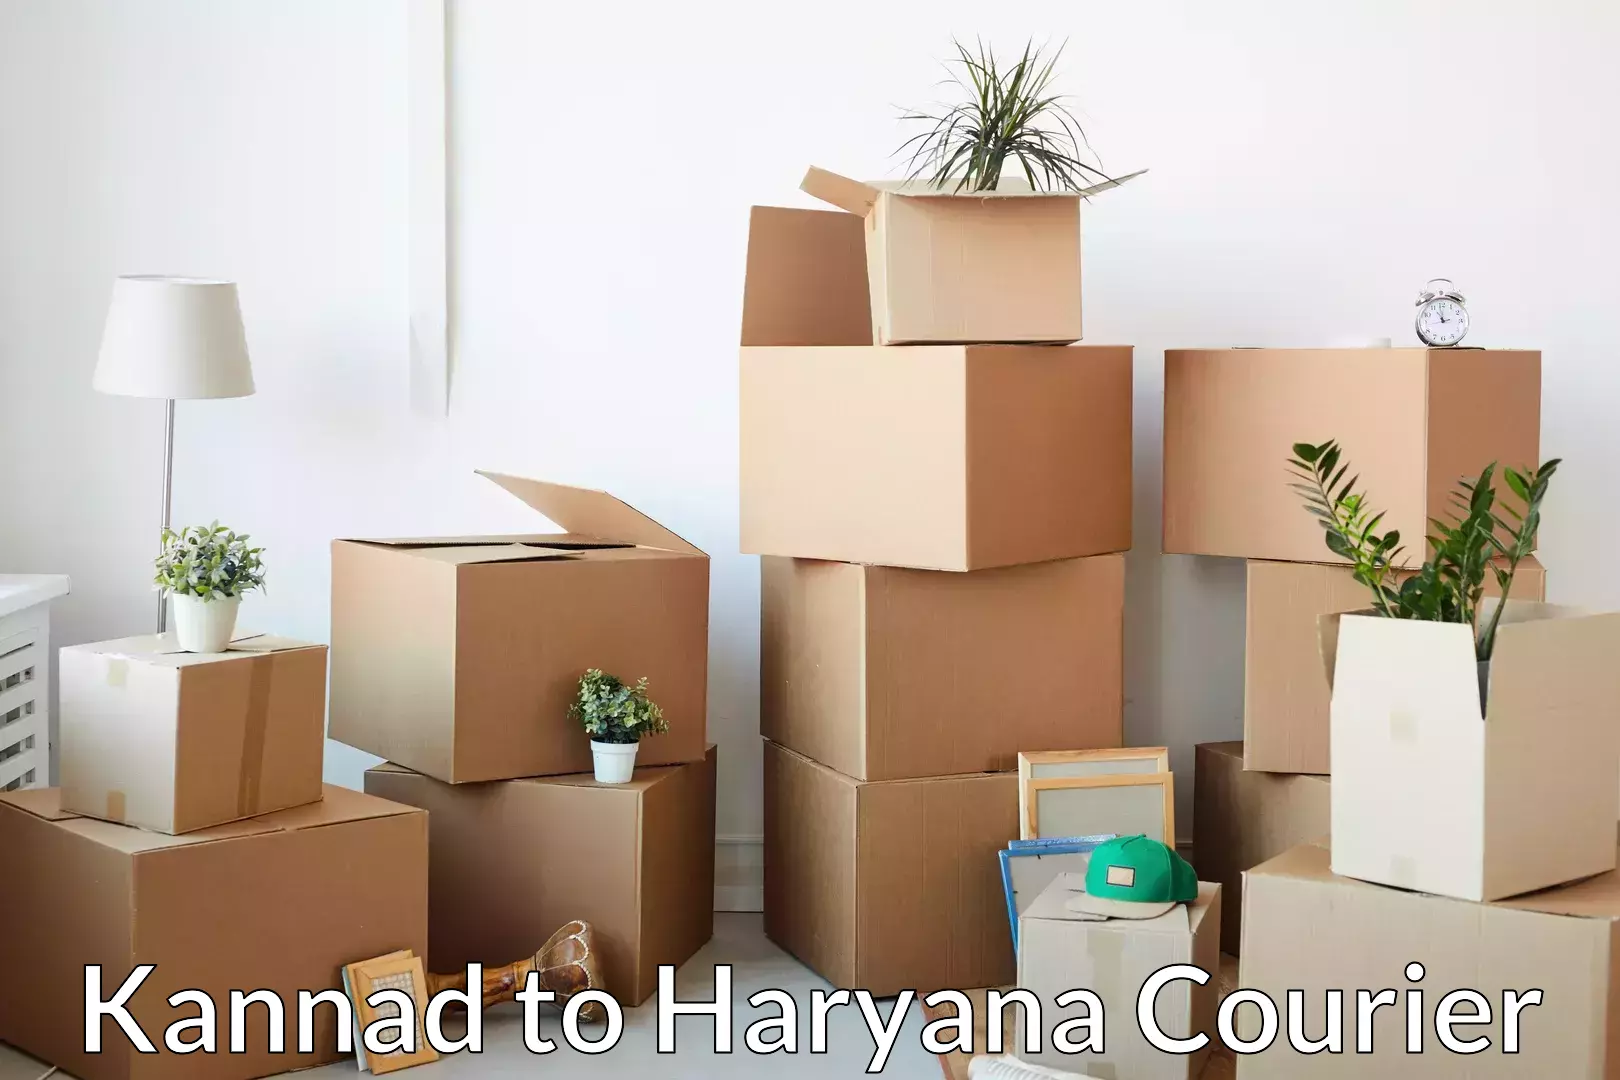 Reliable relocation services in Kannad to Haryana